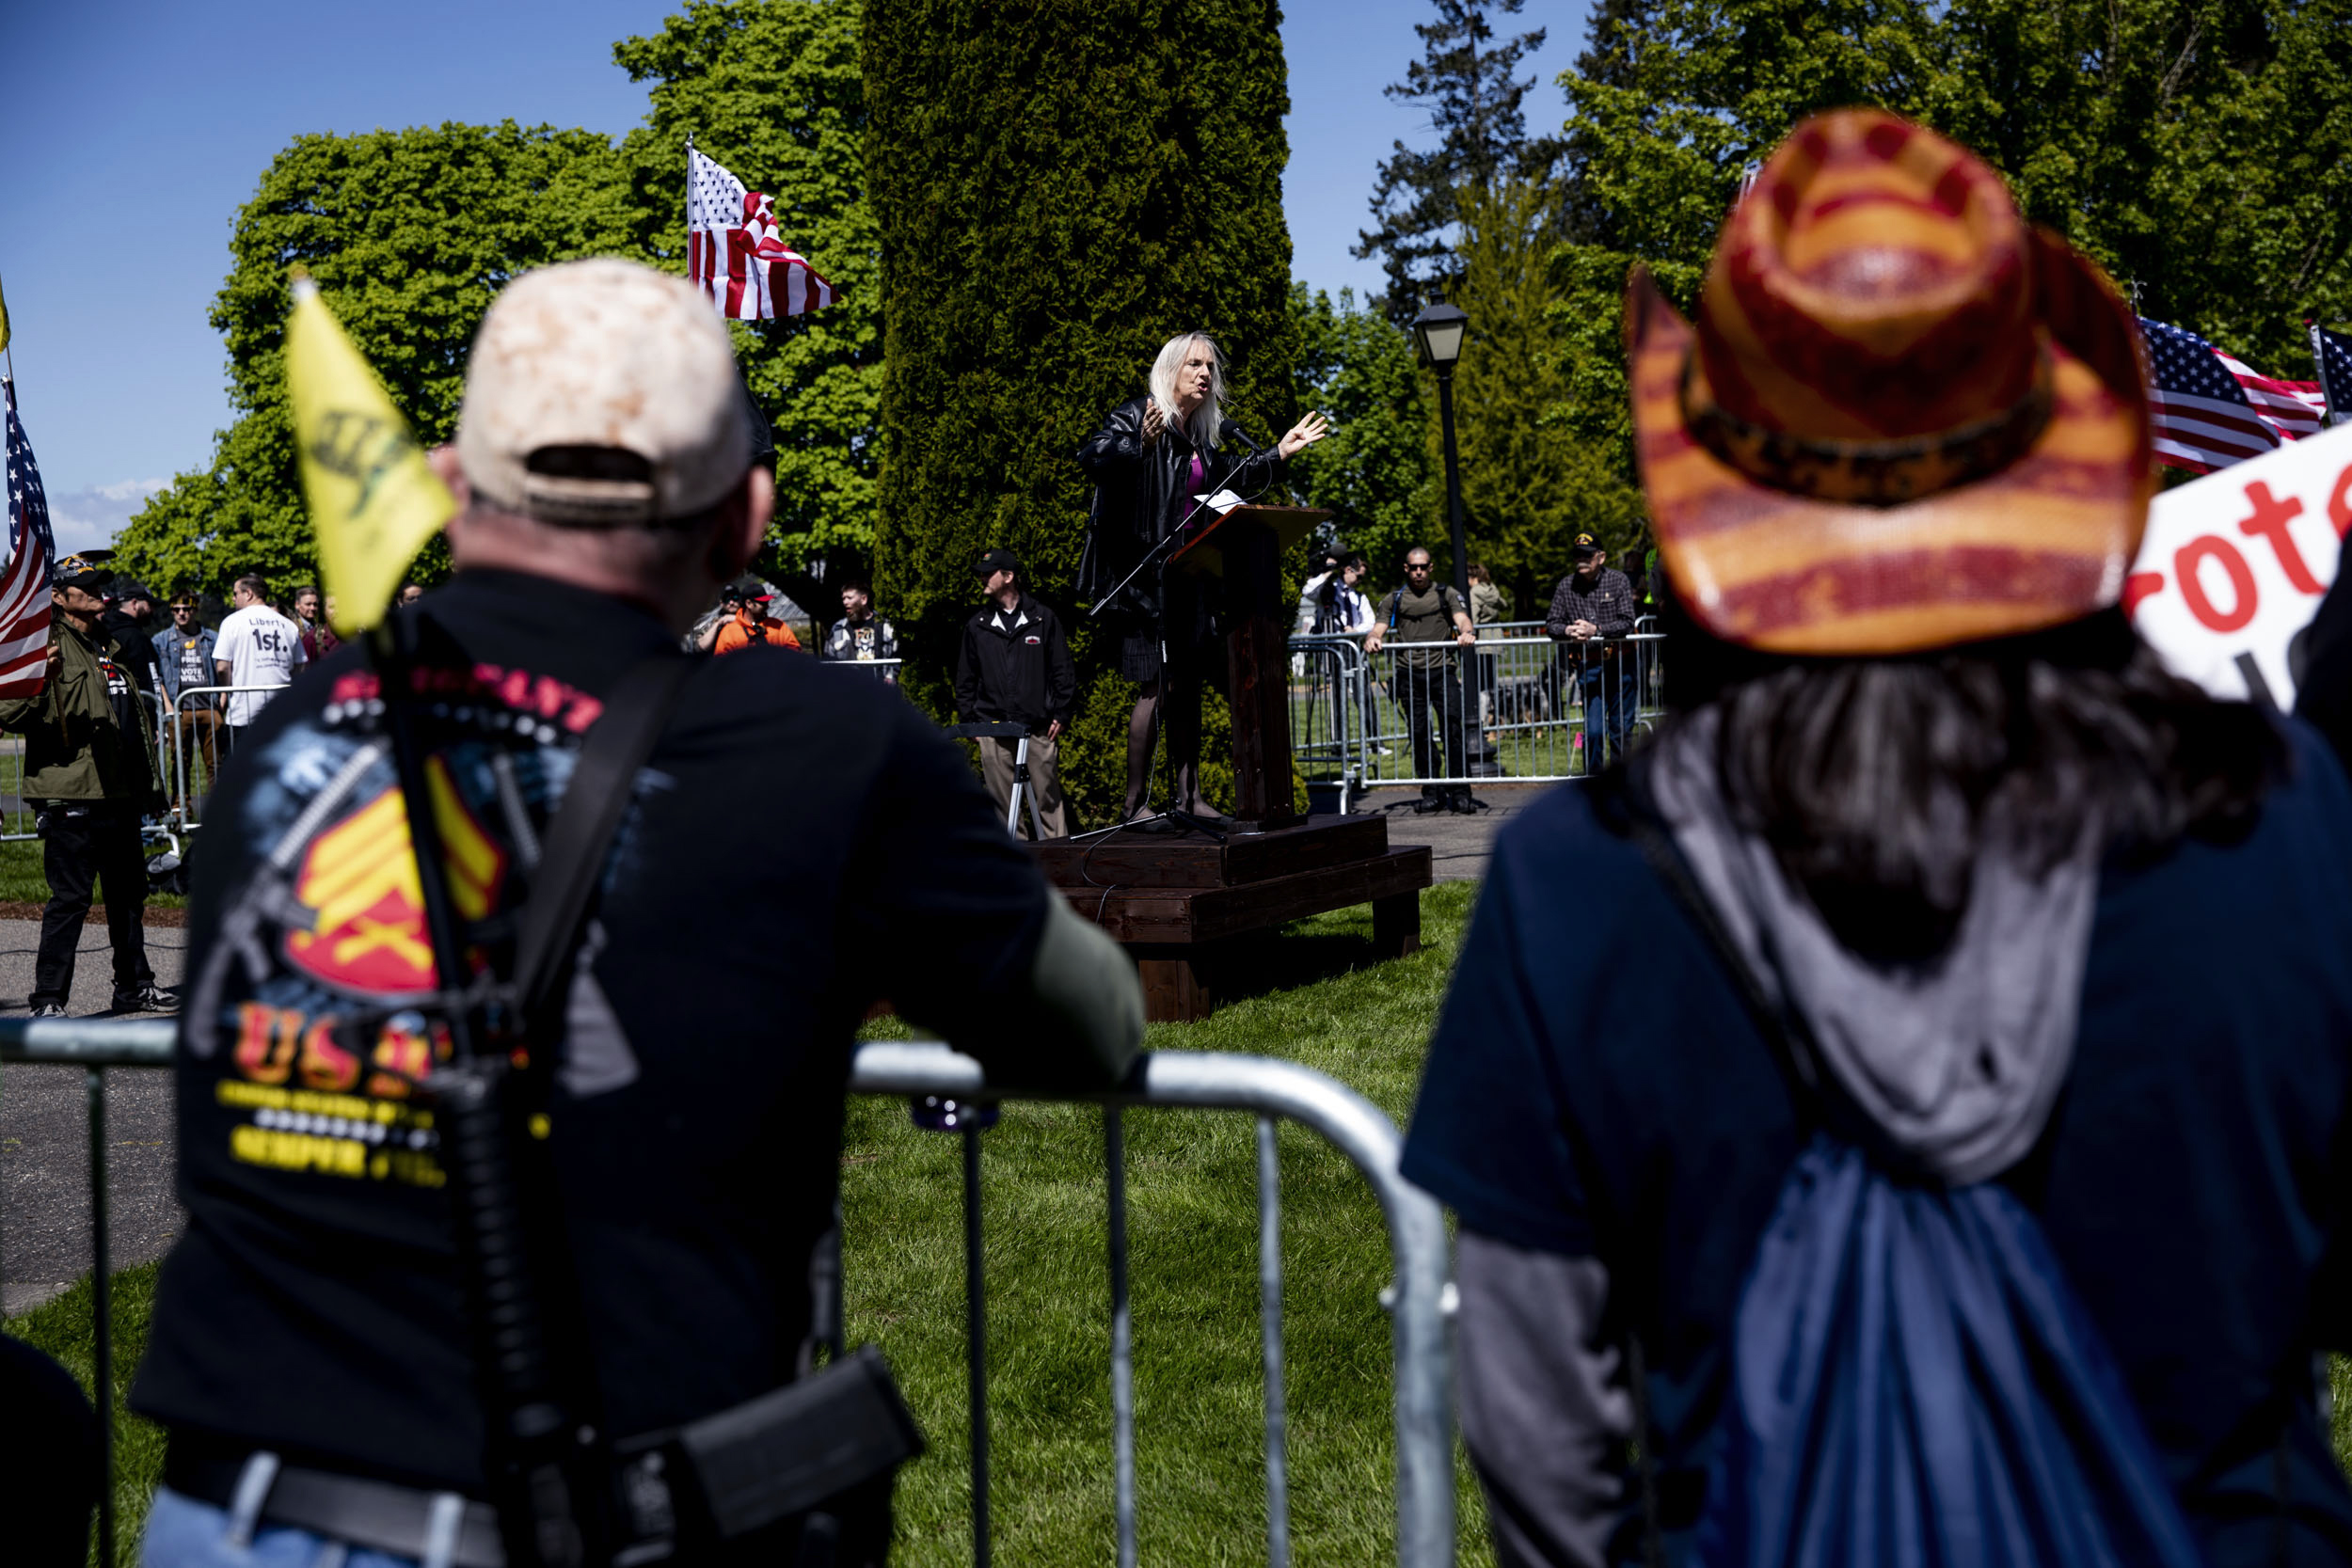 Nicole “Niki” Stallard speaks during a March For Our Rights rally in Olympia on April 27, 2019. As a transwoman and a gun owner, she is very active with Pink Pistols, often traveling to events to speak about the group.